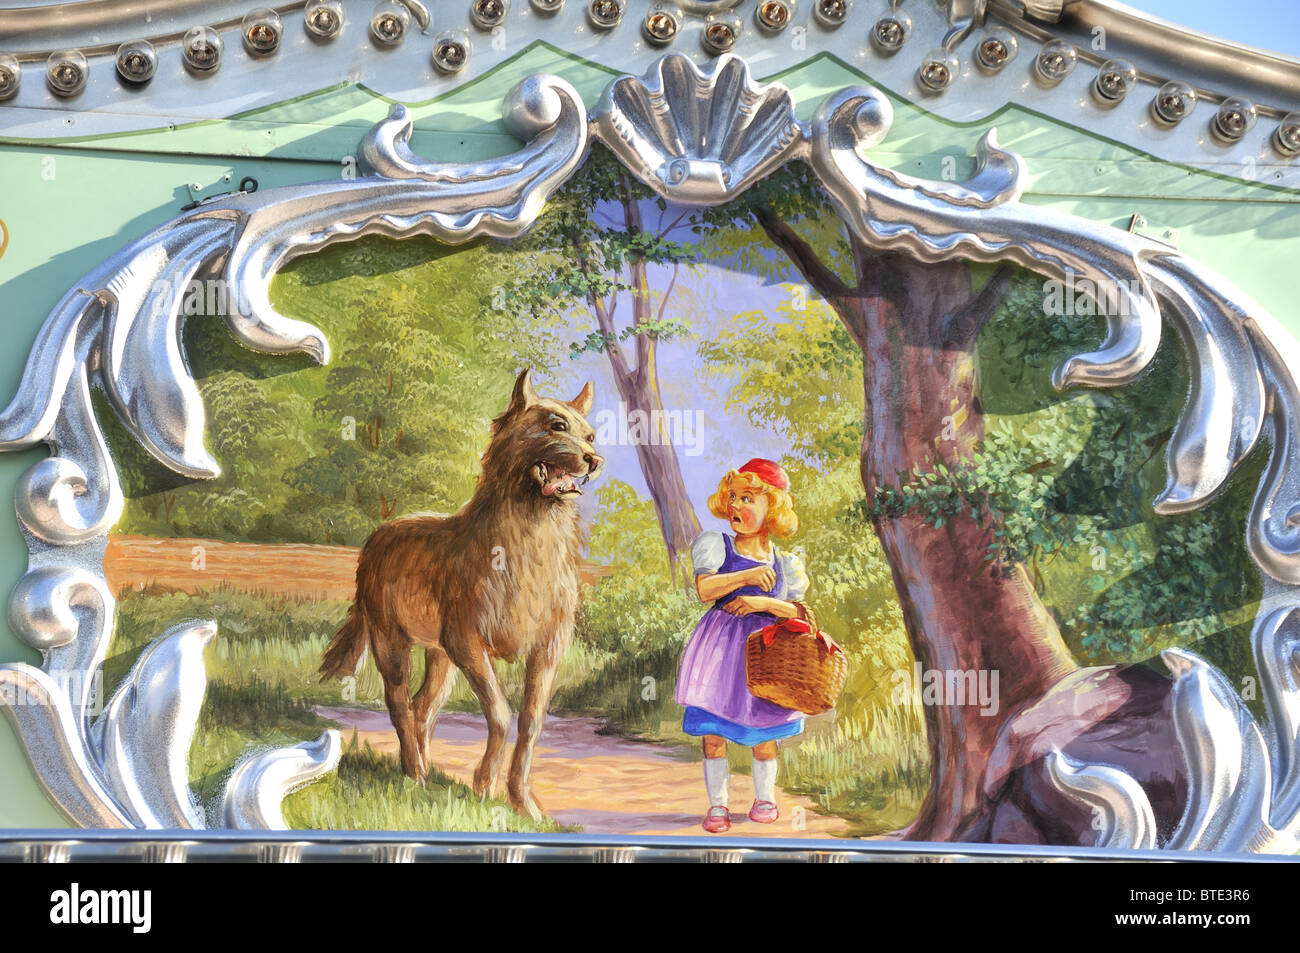 Little red riding hood with wolf fairy story.  Picture taken from painting on fairground ride in Bad Durkheim, Germany Stock Photo